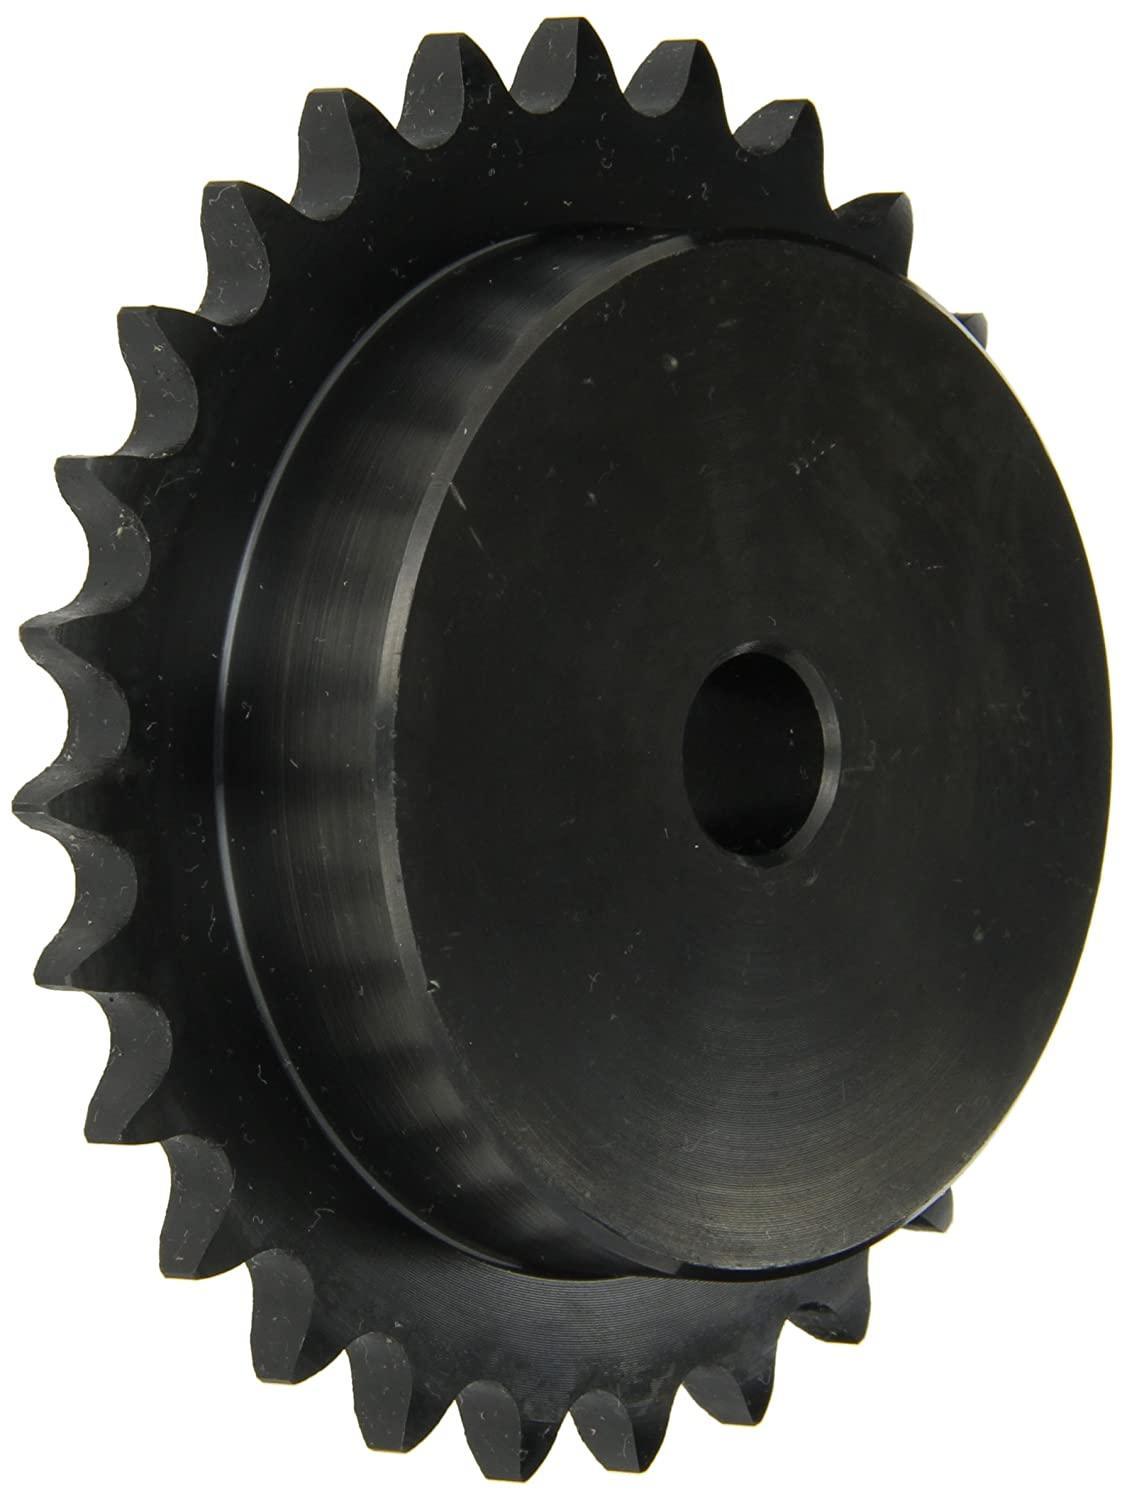 40B15H Roller Chain Sprocket With Stock Bore - Forces Inc